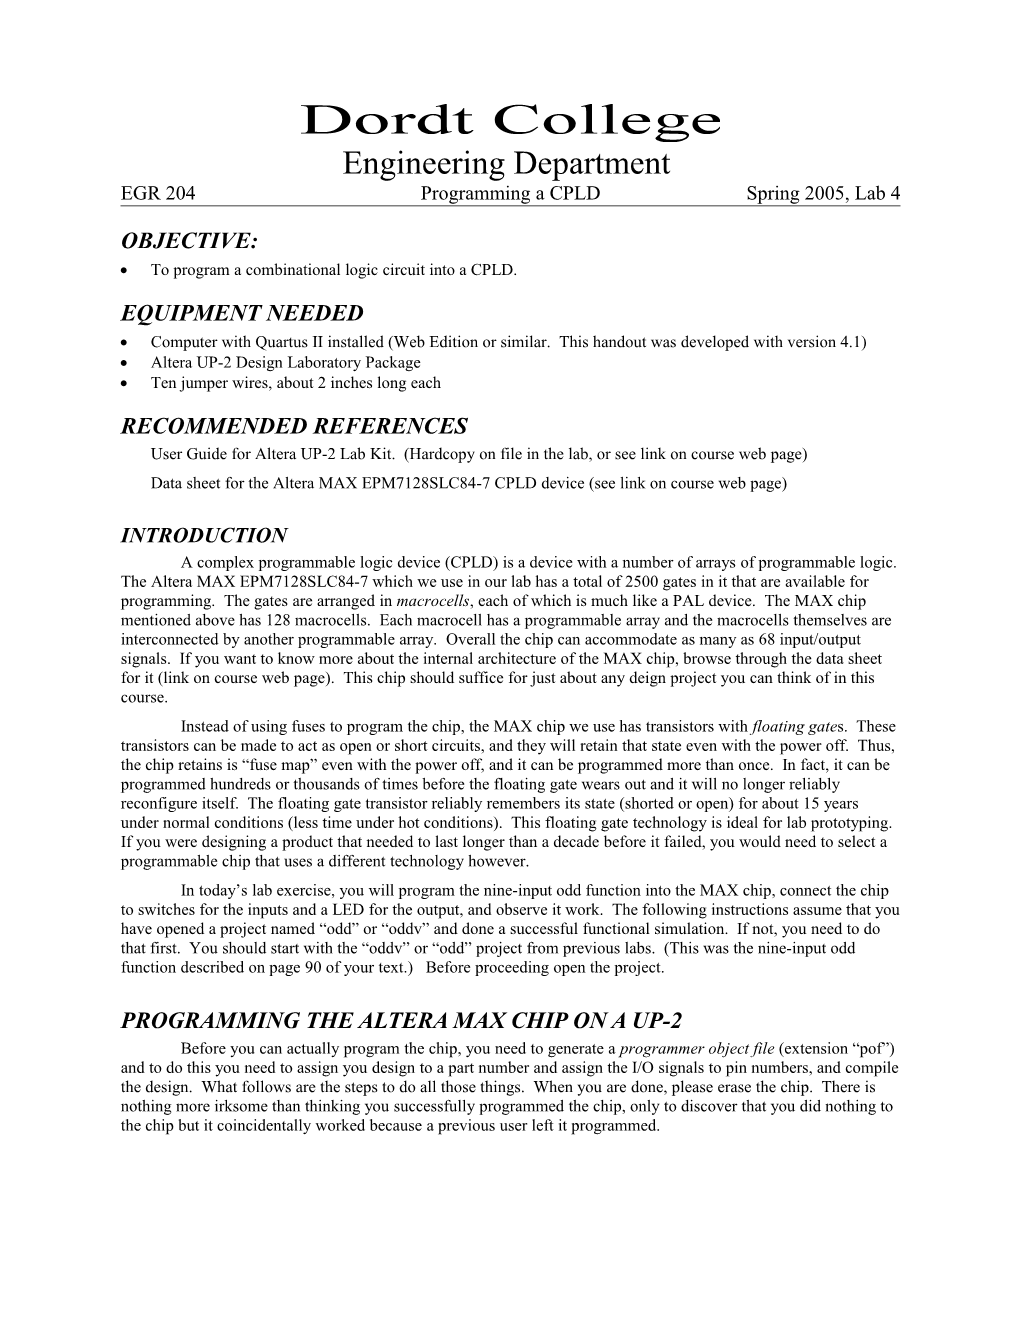 EGR 204 Programming a CPLD Page 2 of 4